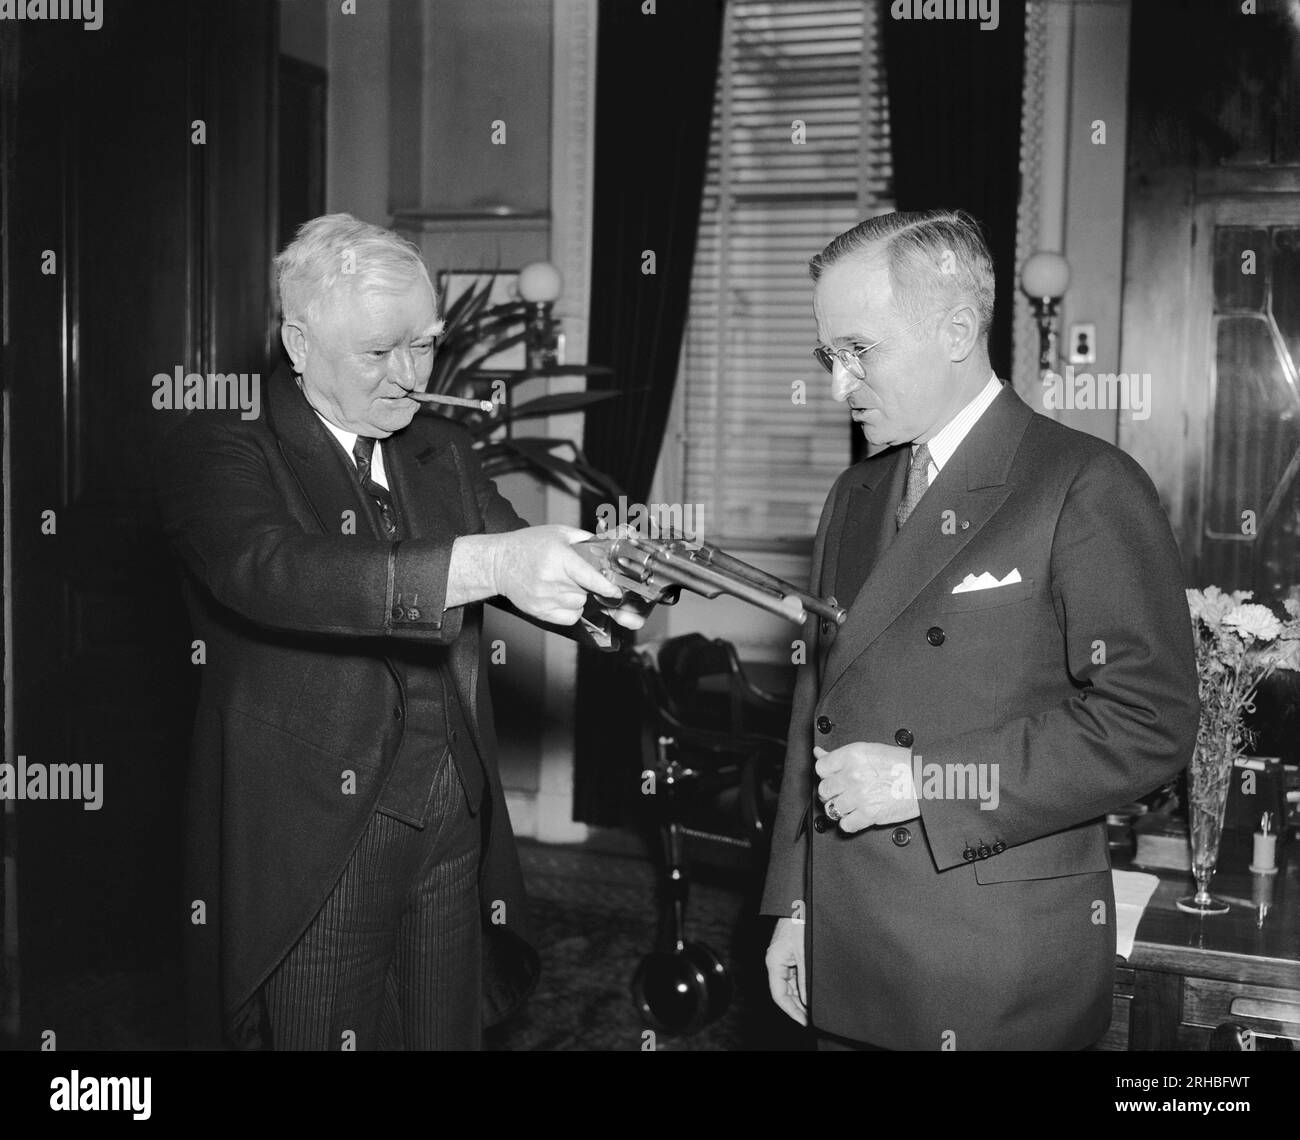 Washington, D.C.:   February 17, 1938  Vice President Garner playfully tries his 'stickup' technique on Senator Harry Truman of Missouri, present owner of the .45 pistols that were formerly used by Jesse James. Senator Truman secured the guns in Southern Missouri from a doctor's wife, whose husband received them in payment of medical services rendered to Frank James, another of the James' boys. Jesse James had previously left them to Frank after he was killed by the Pinkerton men. The bandit garnered nearly $1,000,000 in a series of holdups with the guns. Stock Photo